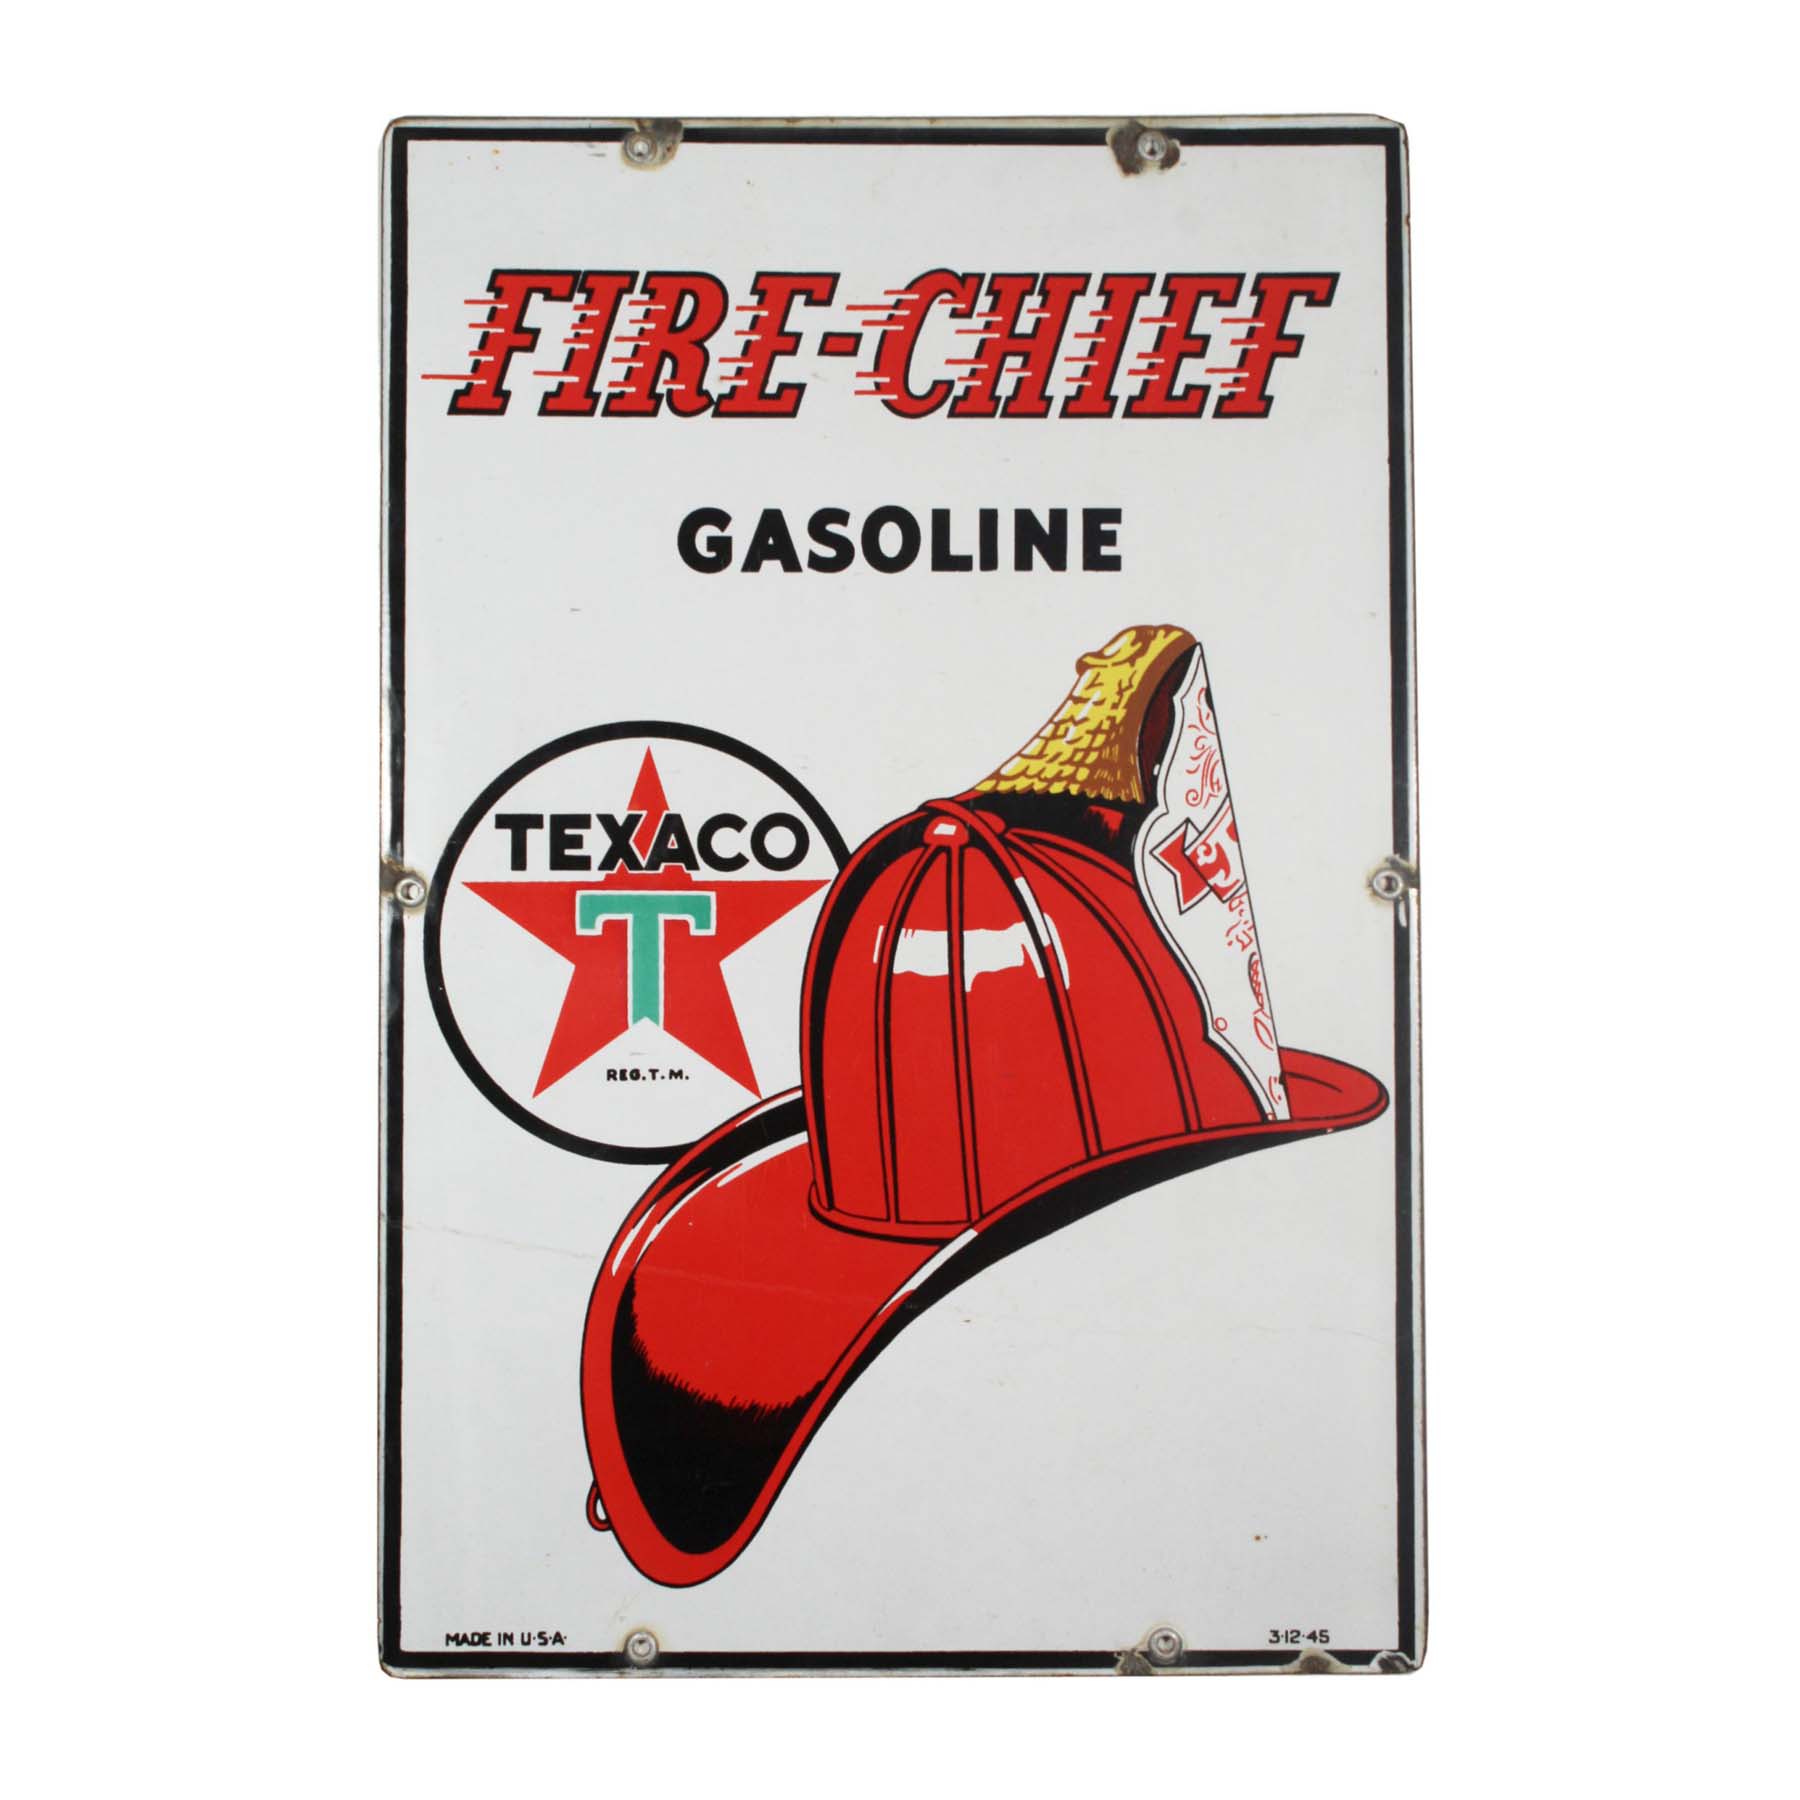 SOLD Vintage Porcelain “Texaco Fire Chief Gasoline” Advertising Sign-0